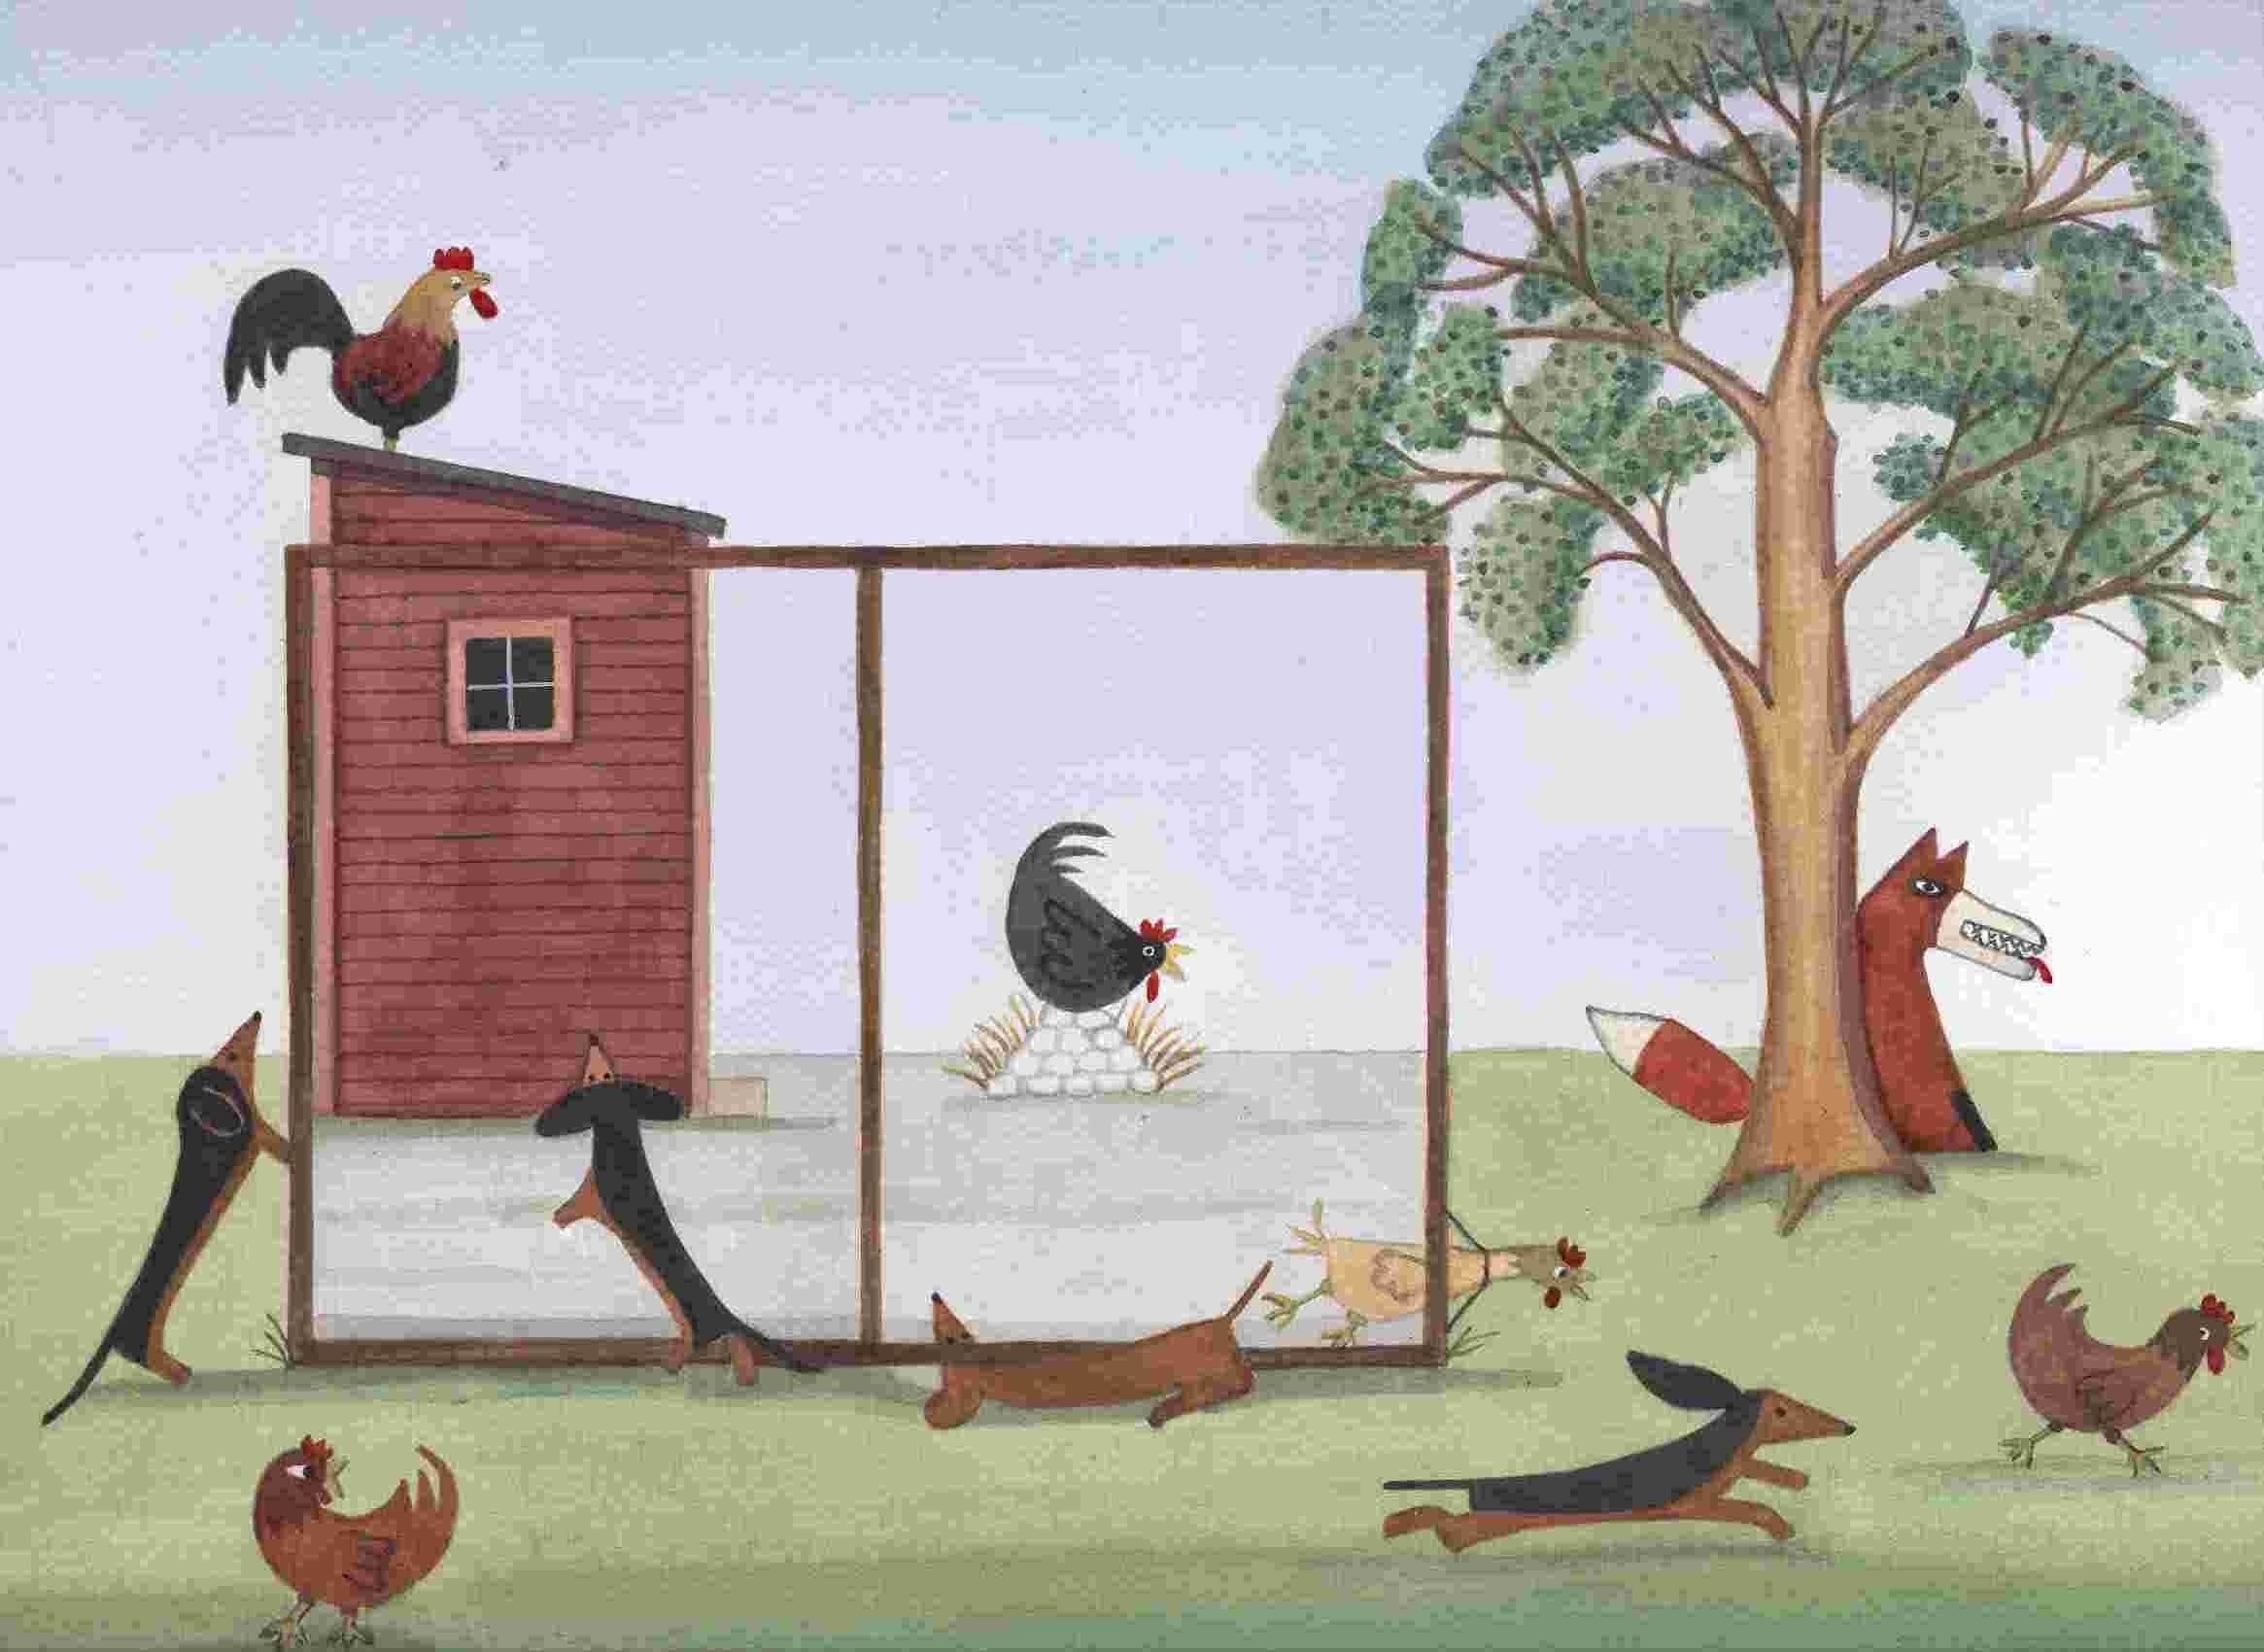 Dachshunds (doxies) chasing chickens and roosters / Lynch signed folk art print